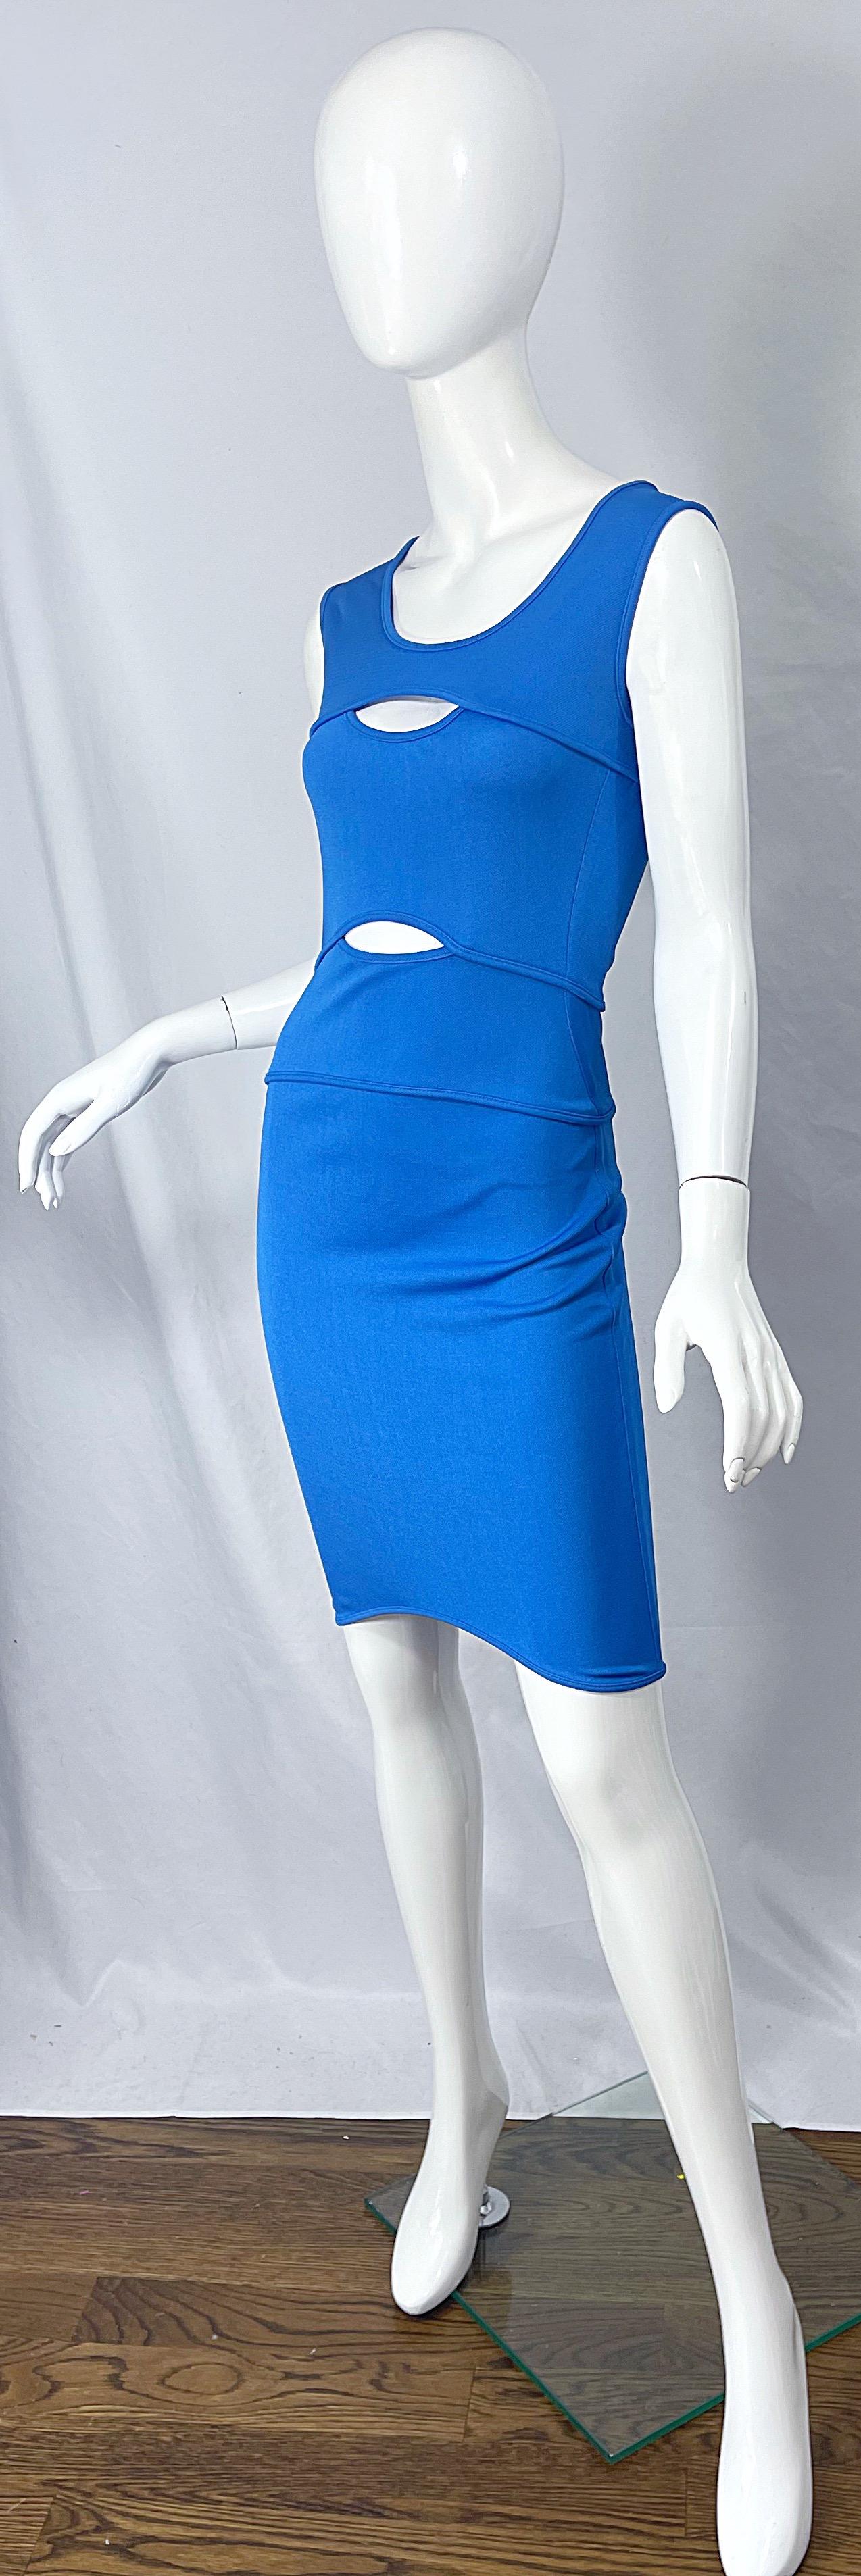 Thierry Mugler 1990s Blue Cut Out Vintage Body Con 90s Dress Size 44 / 6 - 8 In Excellent Condition For Sale In San Diego, CA